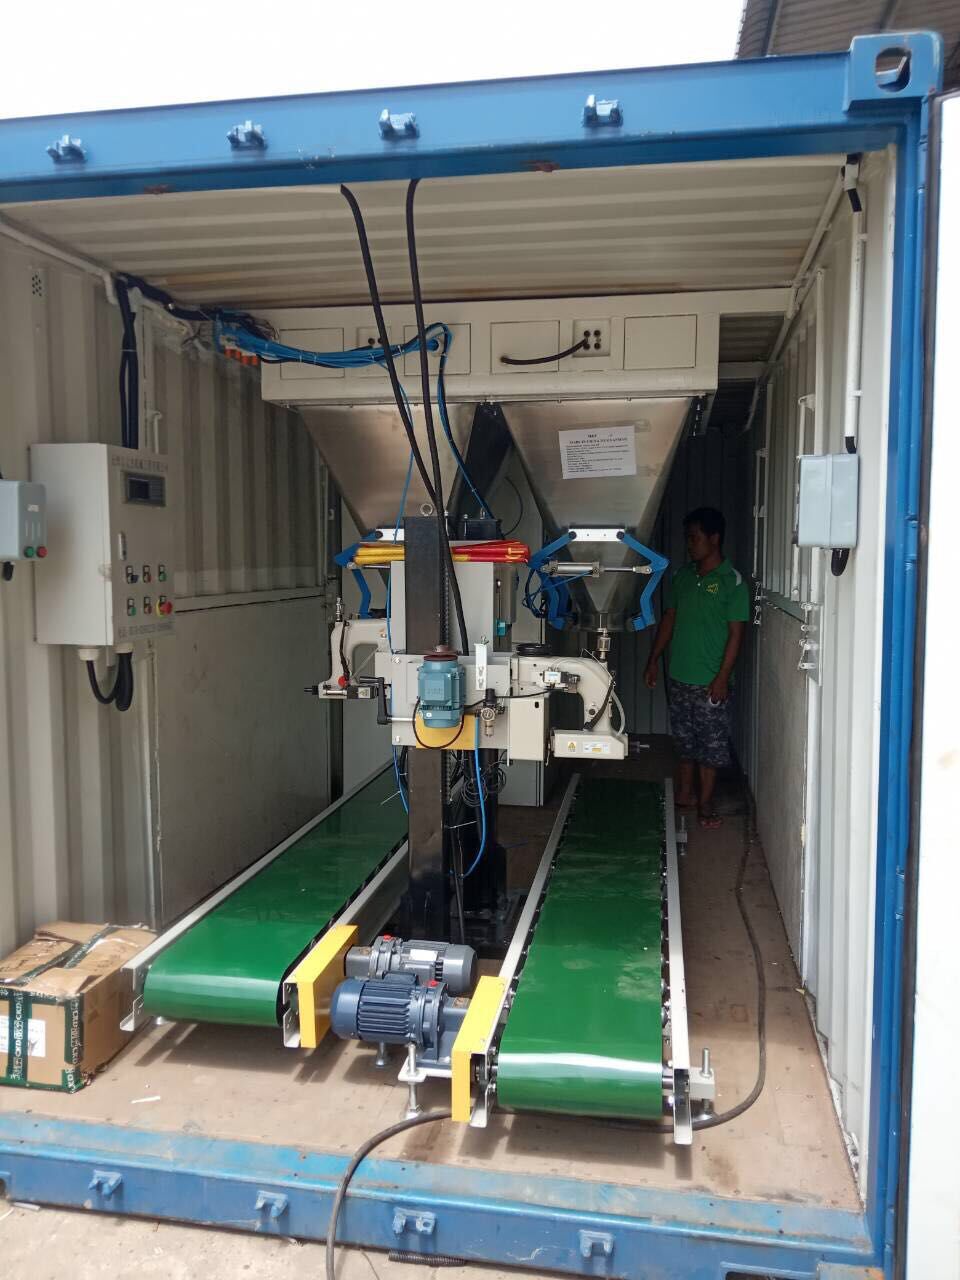 MOBILE RICE BAGGING MACHINES containerized bagging system Mobile Bagging Unit MOBILE BAGGING MACHINES for Grains, pulses, iodised salts, sugar Containerised bagging system